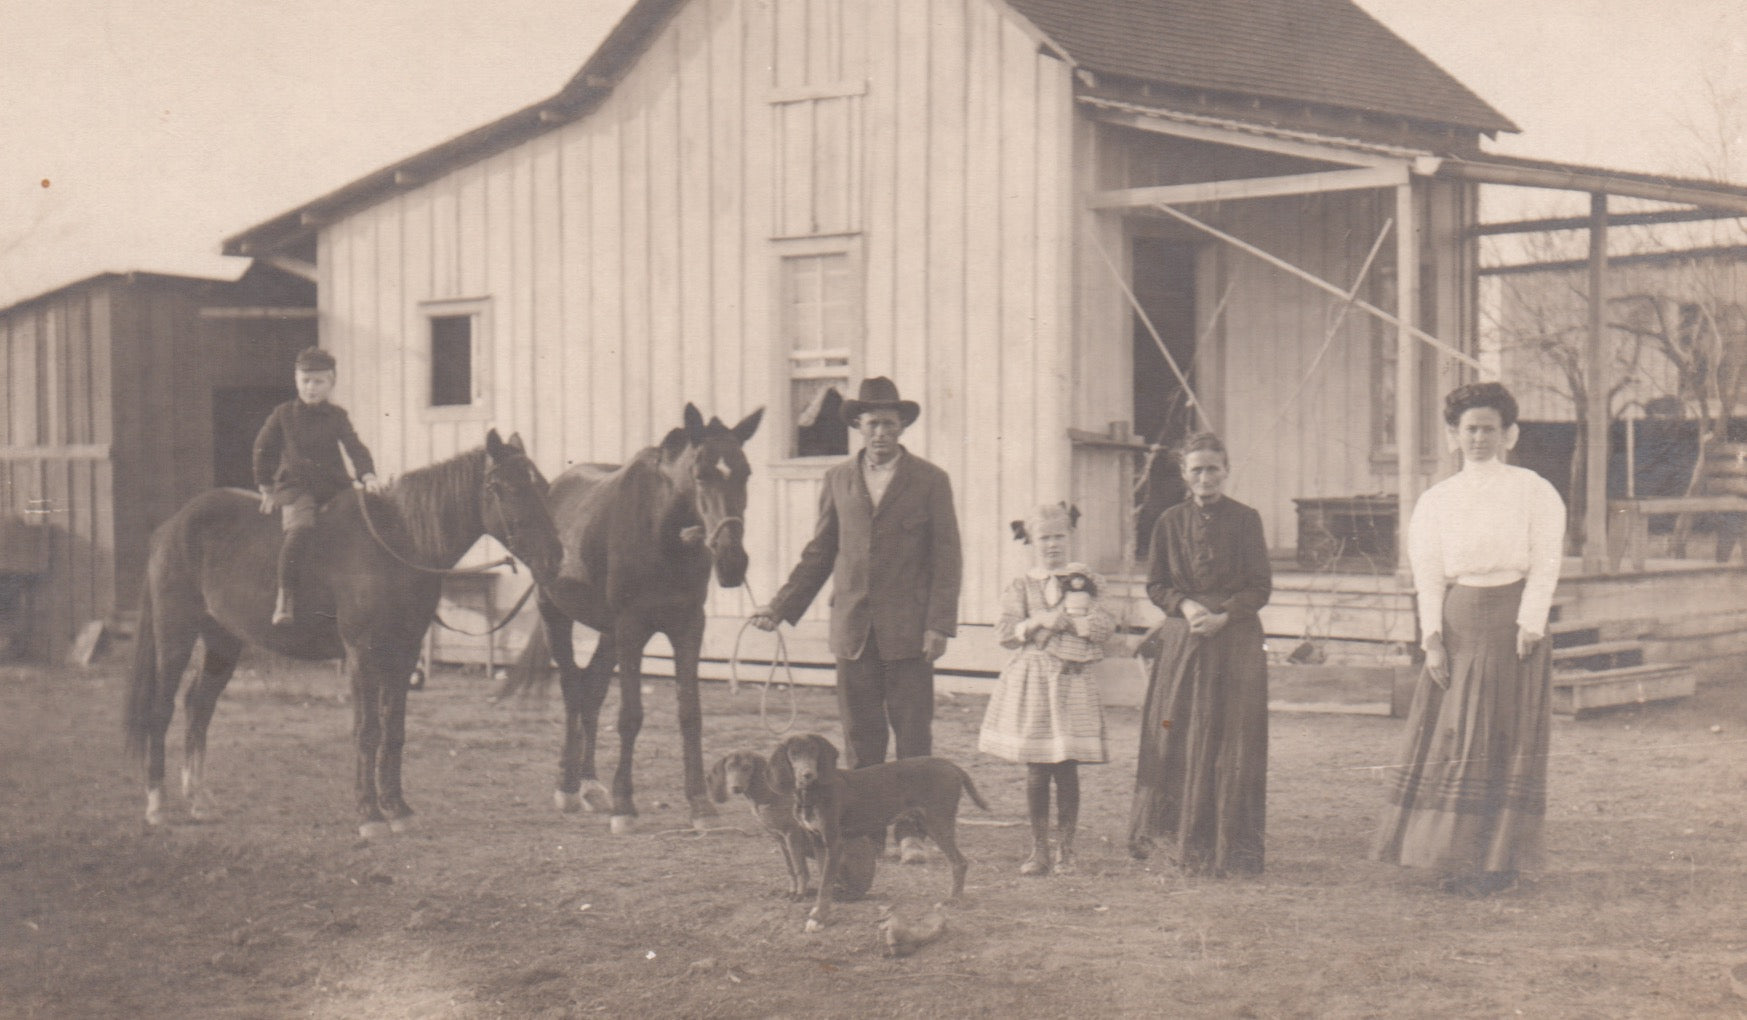 American Homestead Family Farm House Coonhound Dogs Antique Photo on Board